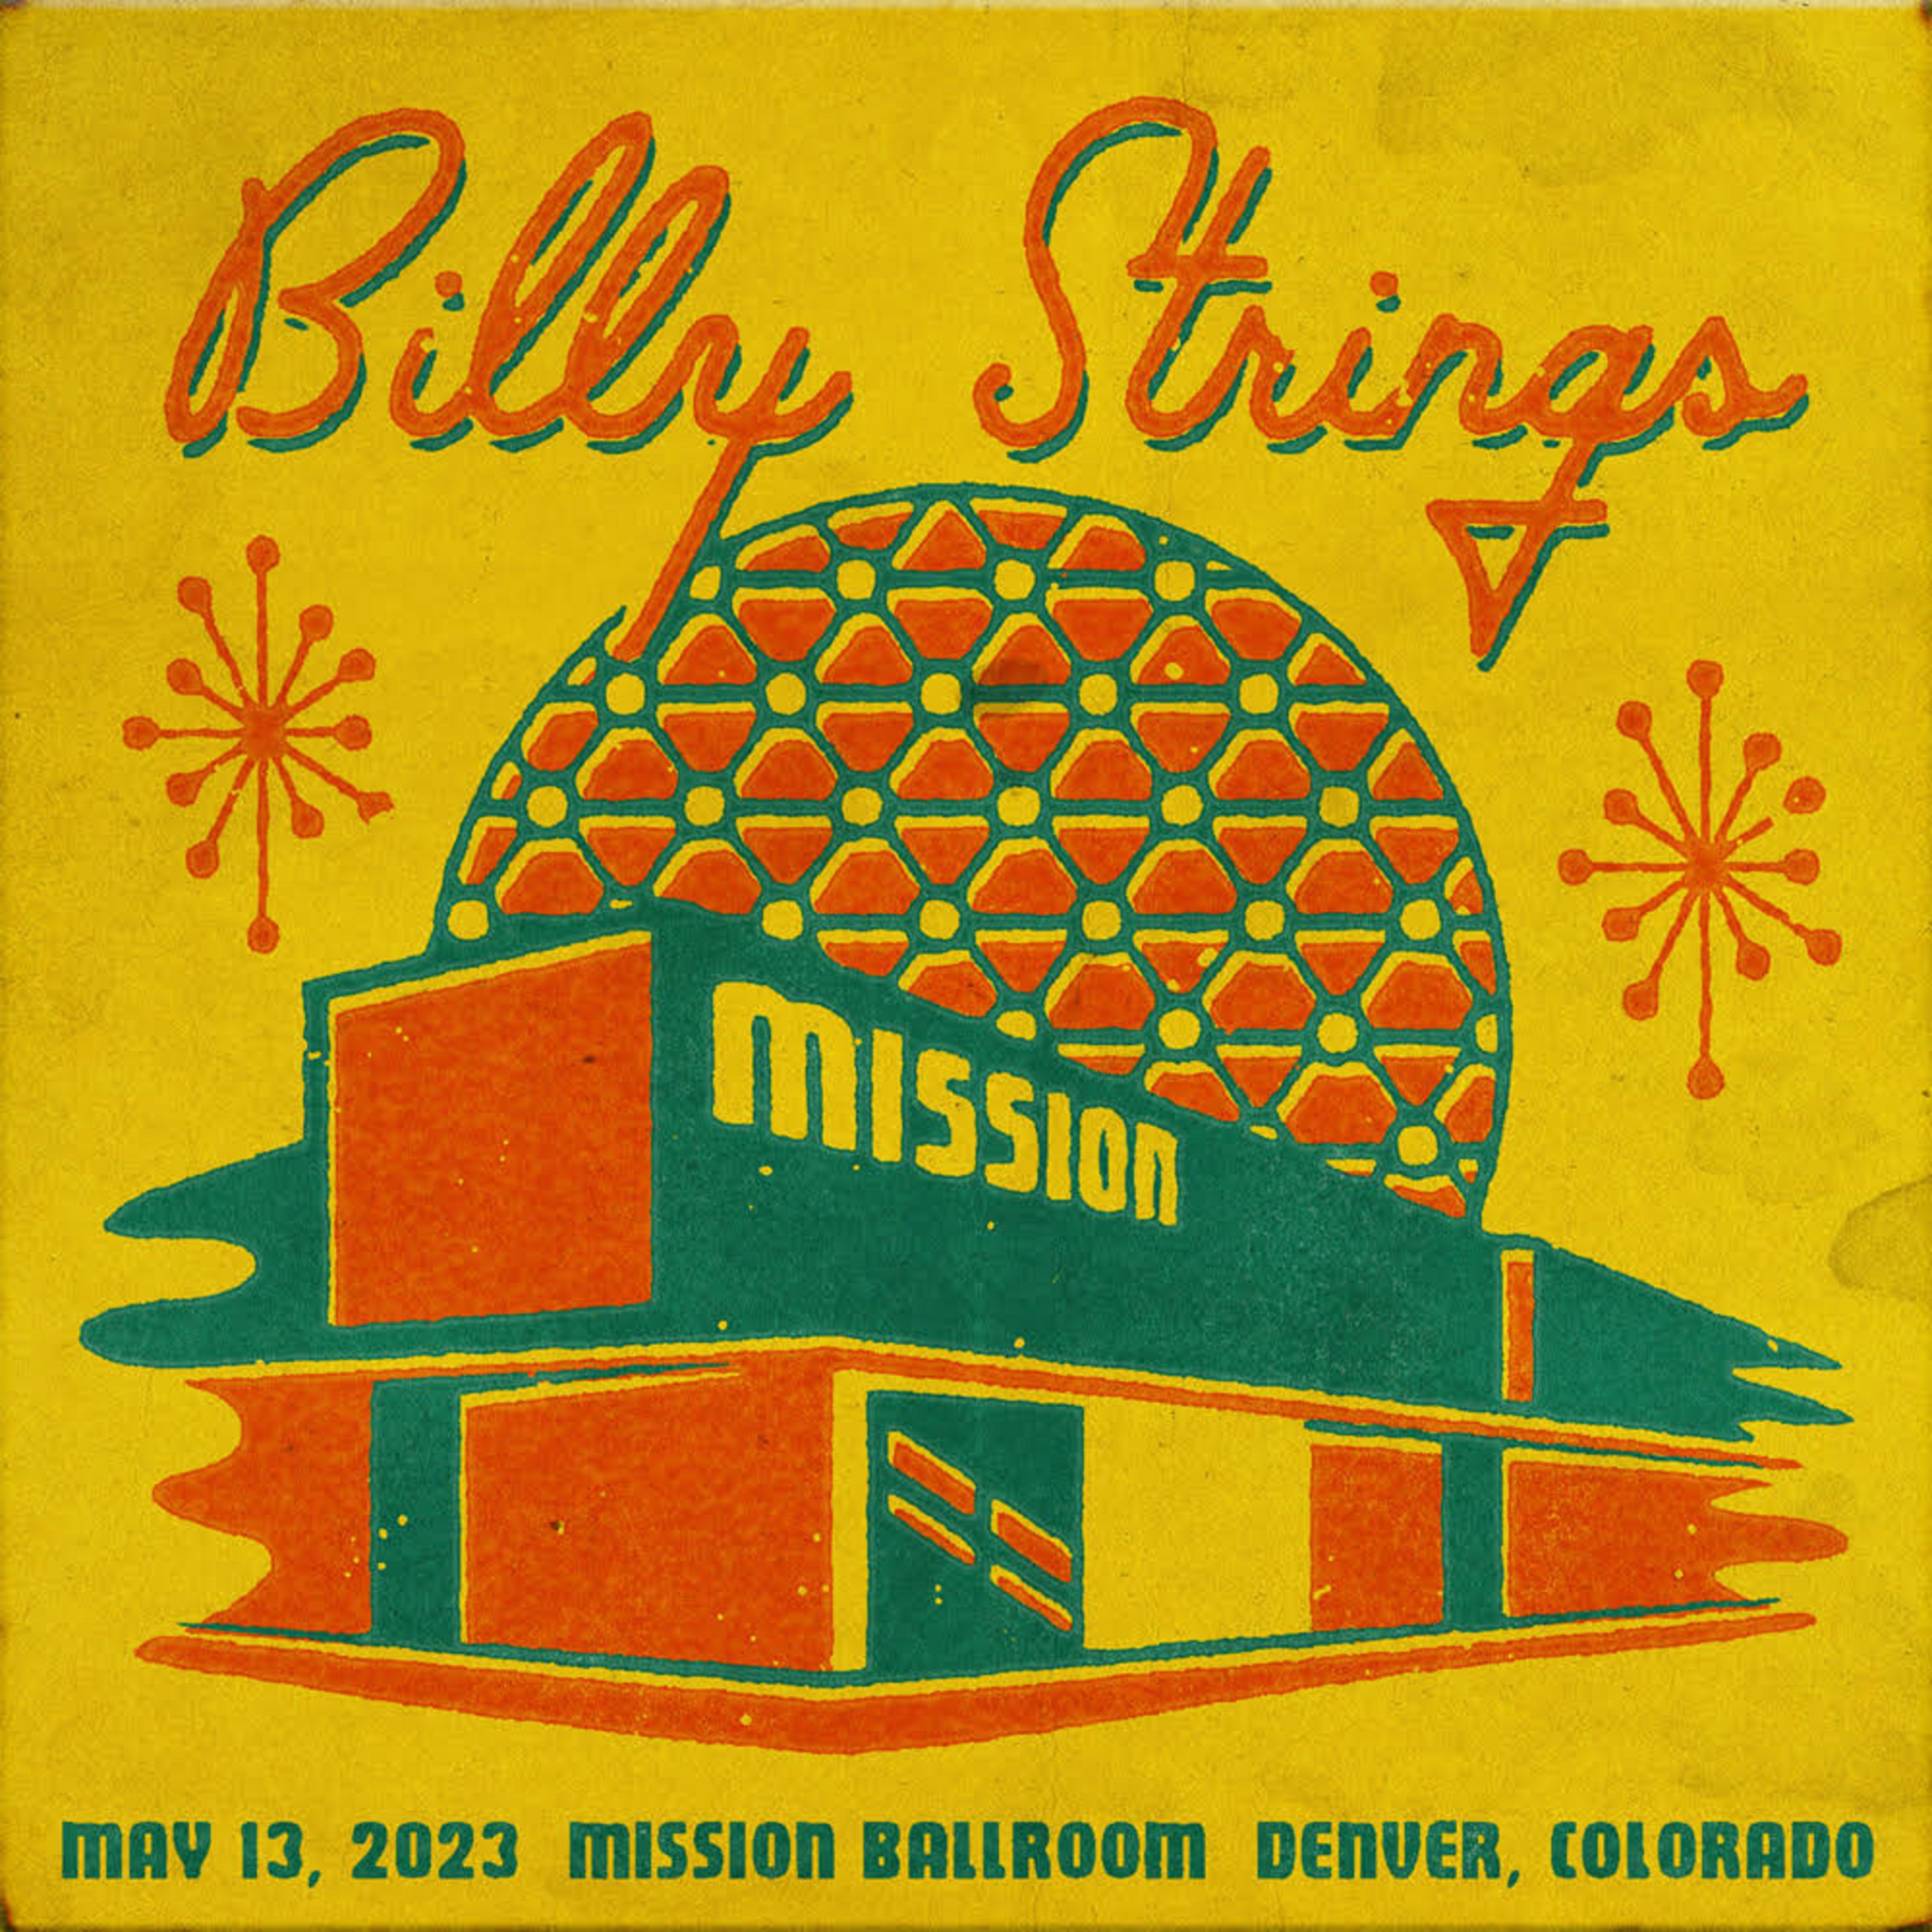 BILLY STRINGS CONFIRMS NEW SHOW AT DENVER’S MISSION BALLROOM ON MAY 13